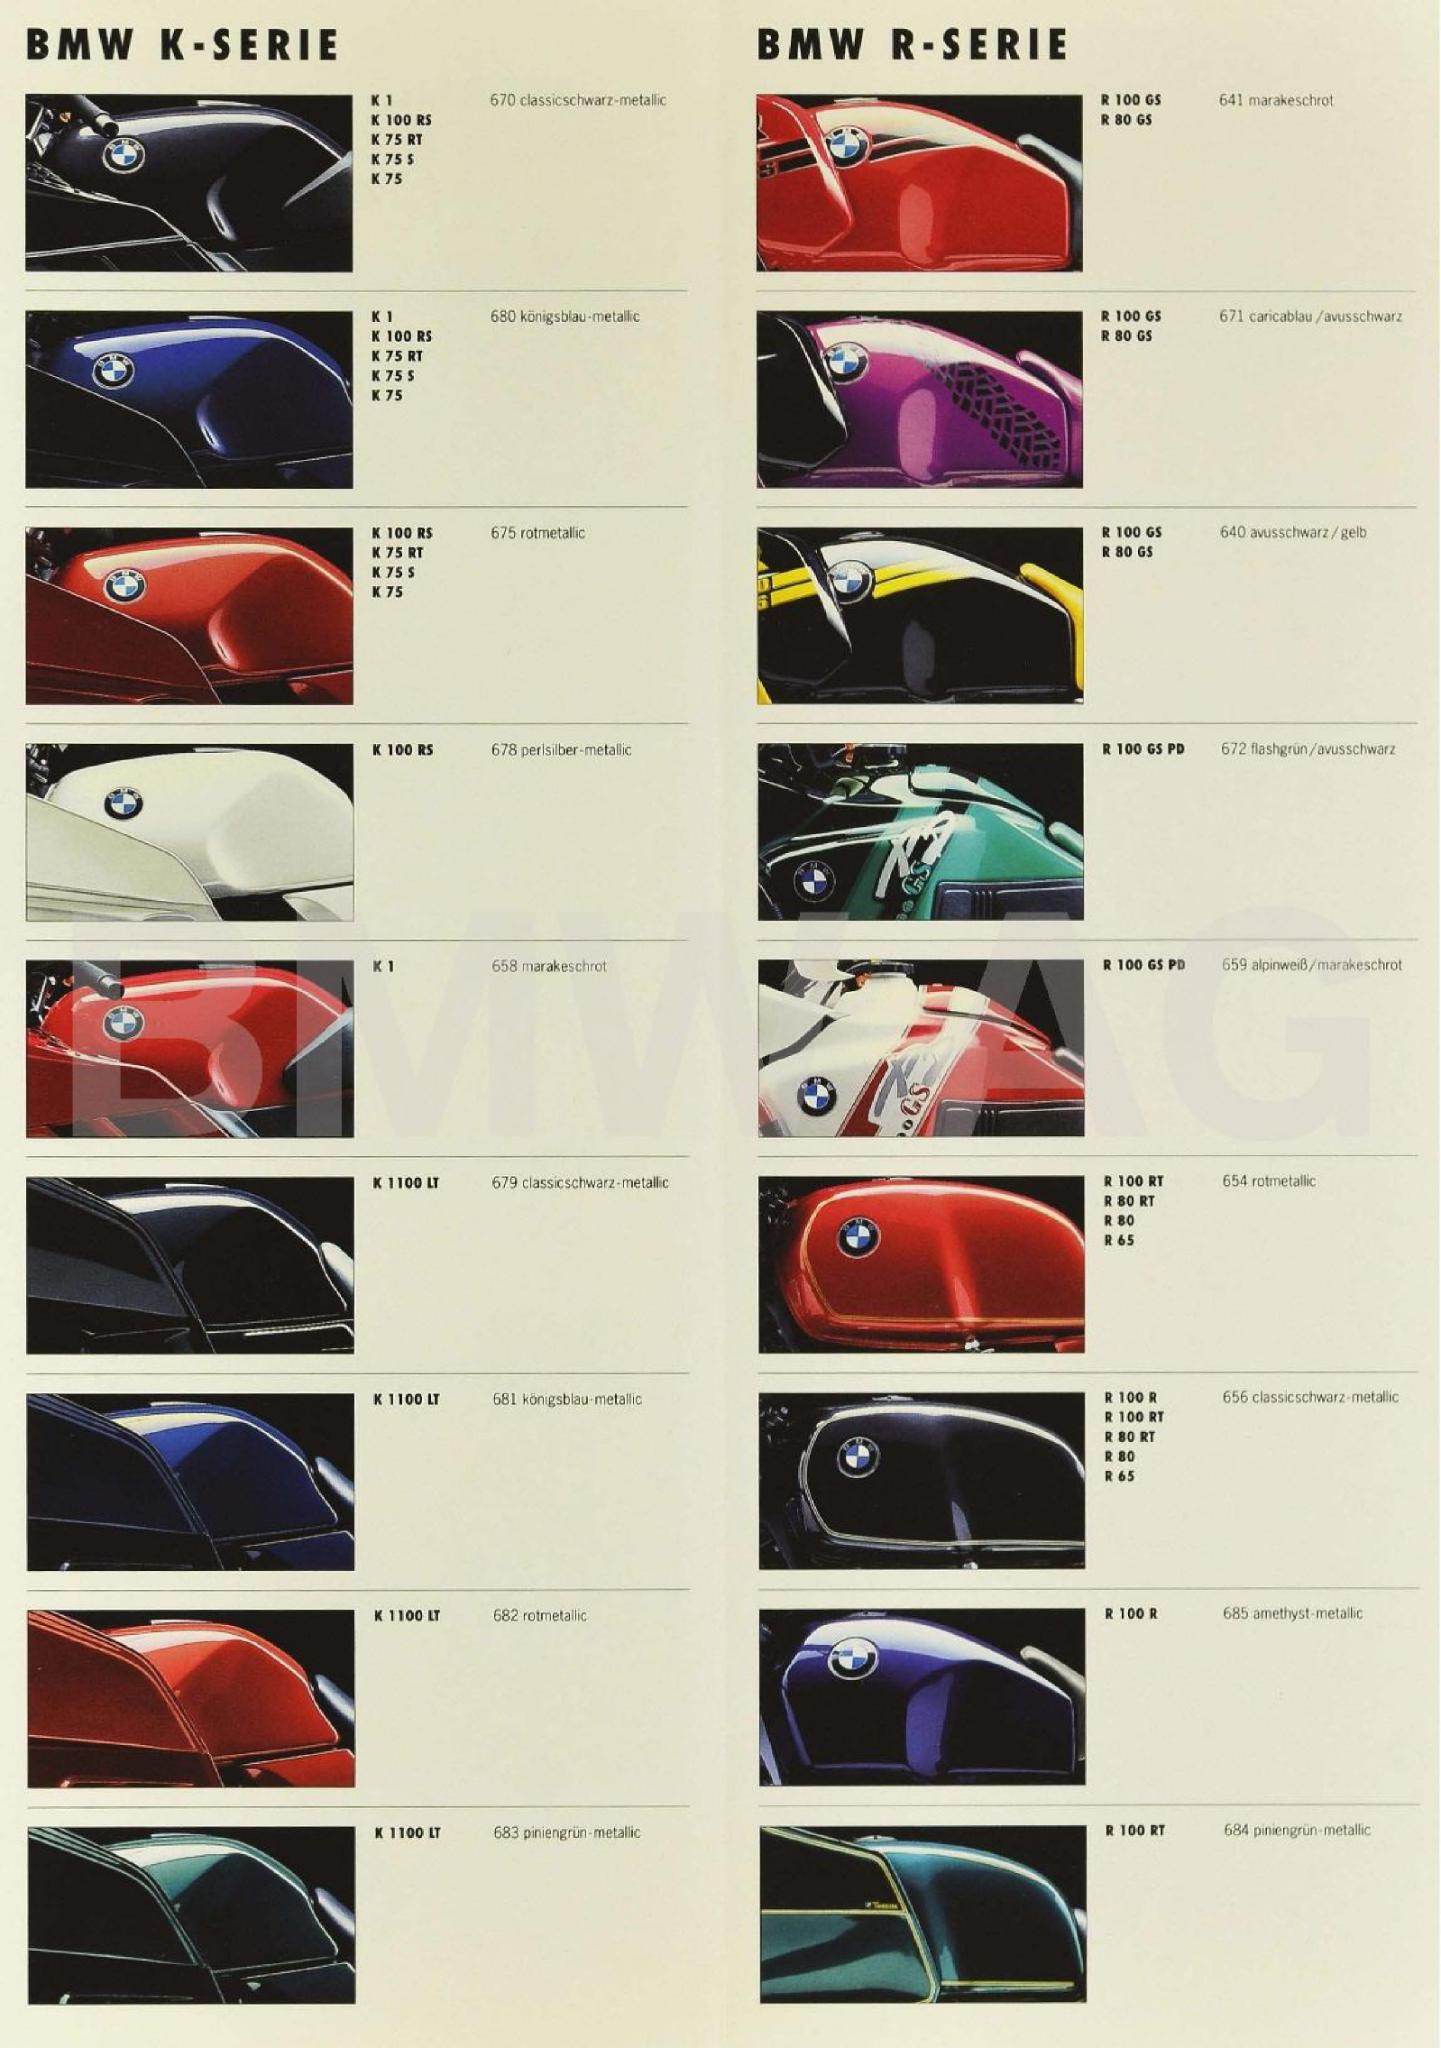 Colors used on BMW Motorcycles in 1991